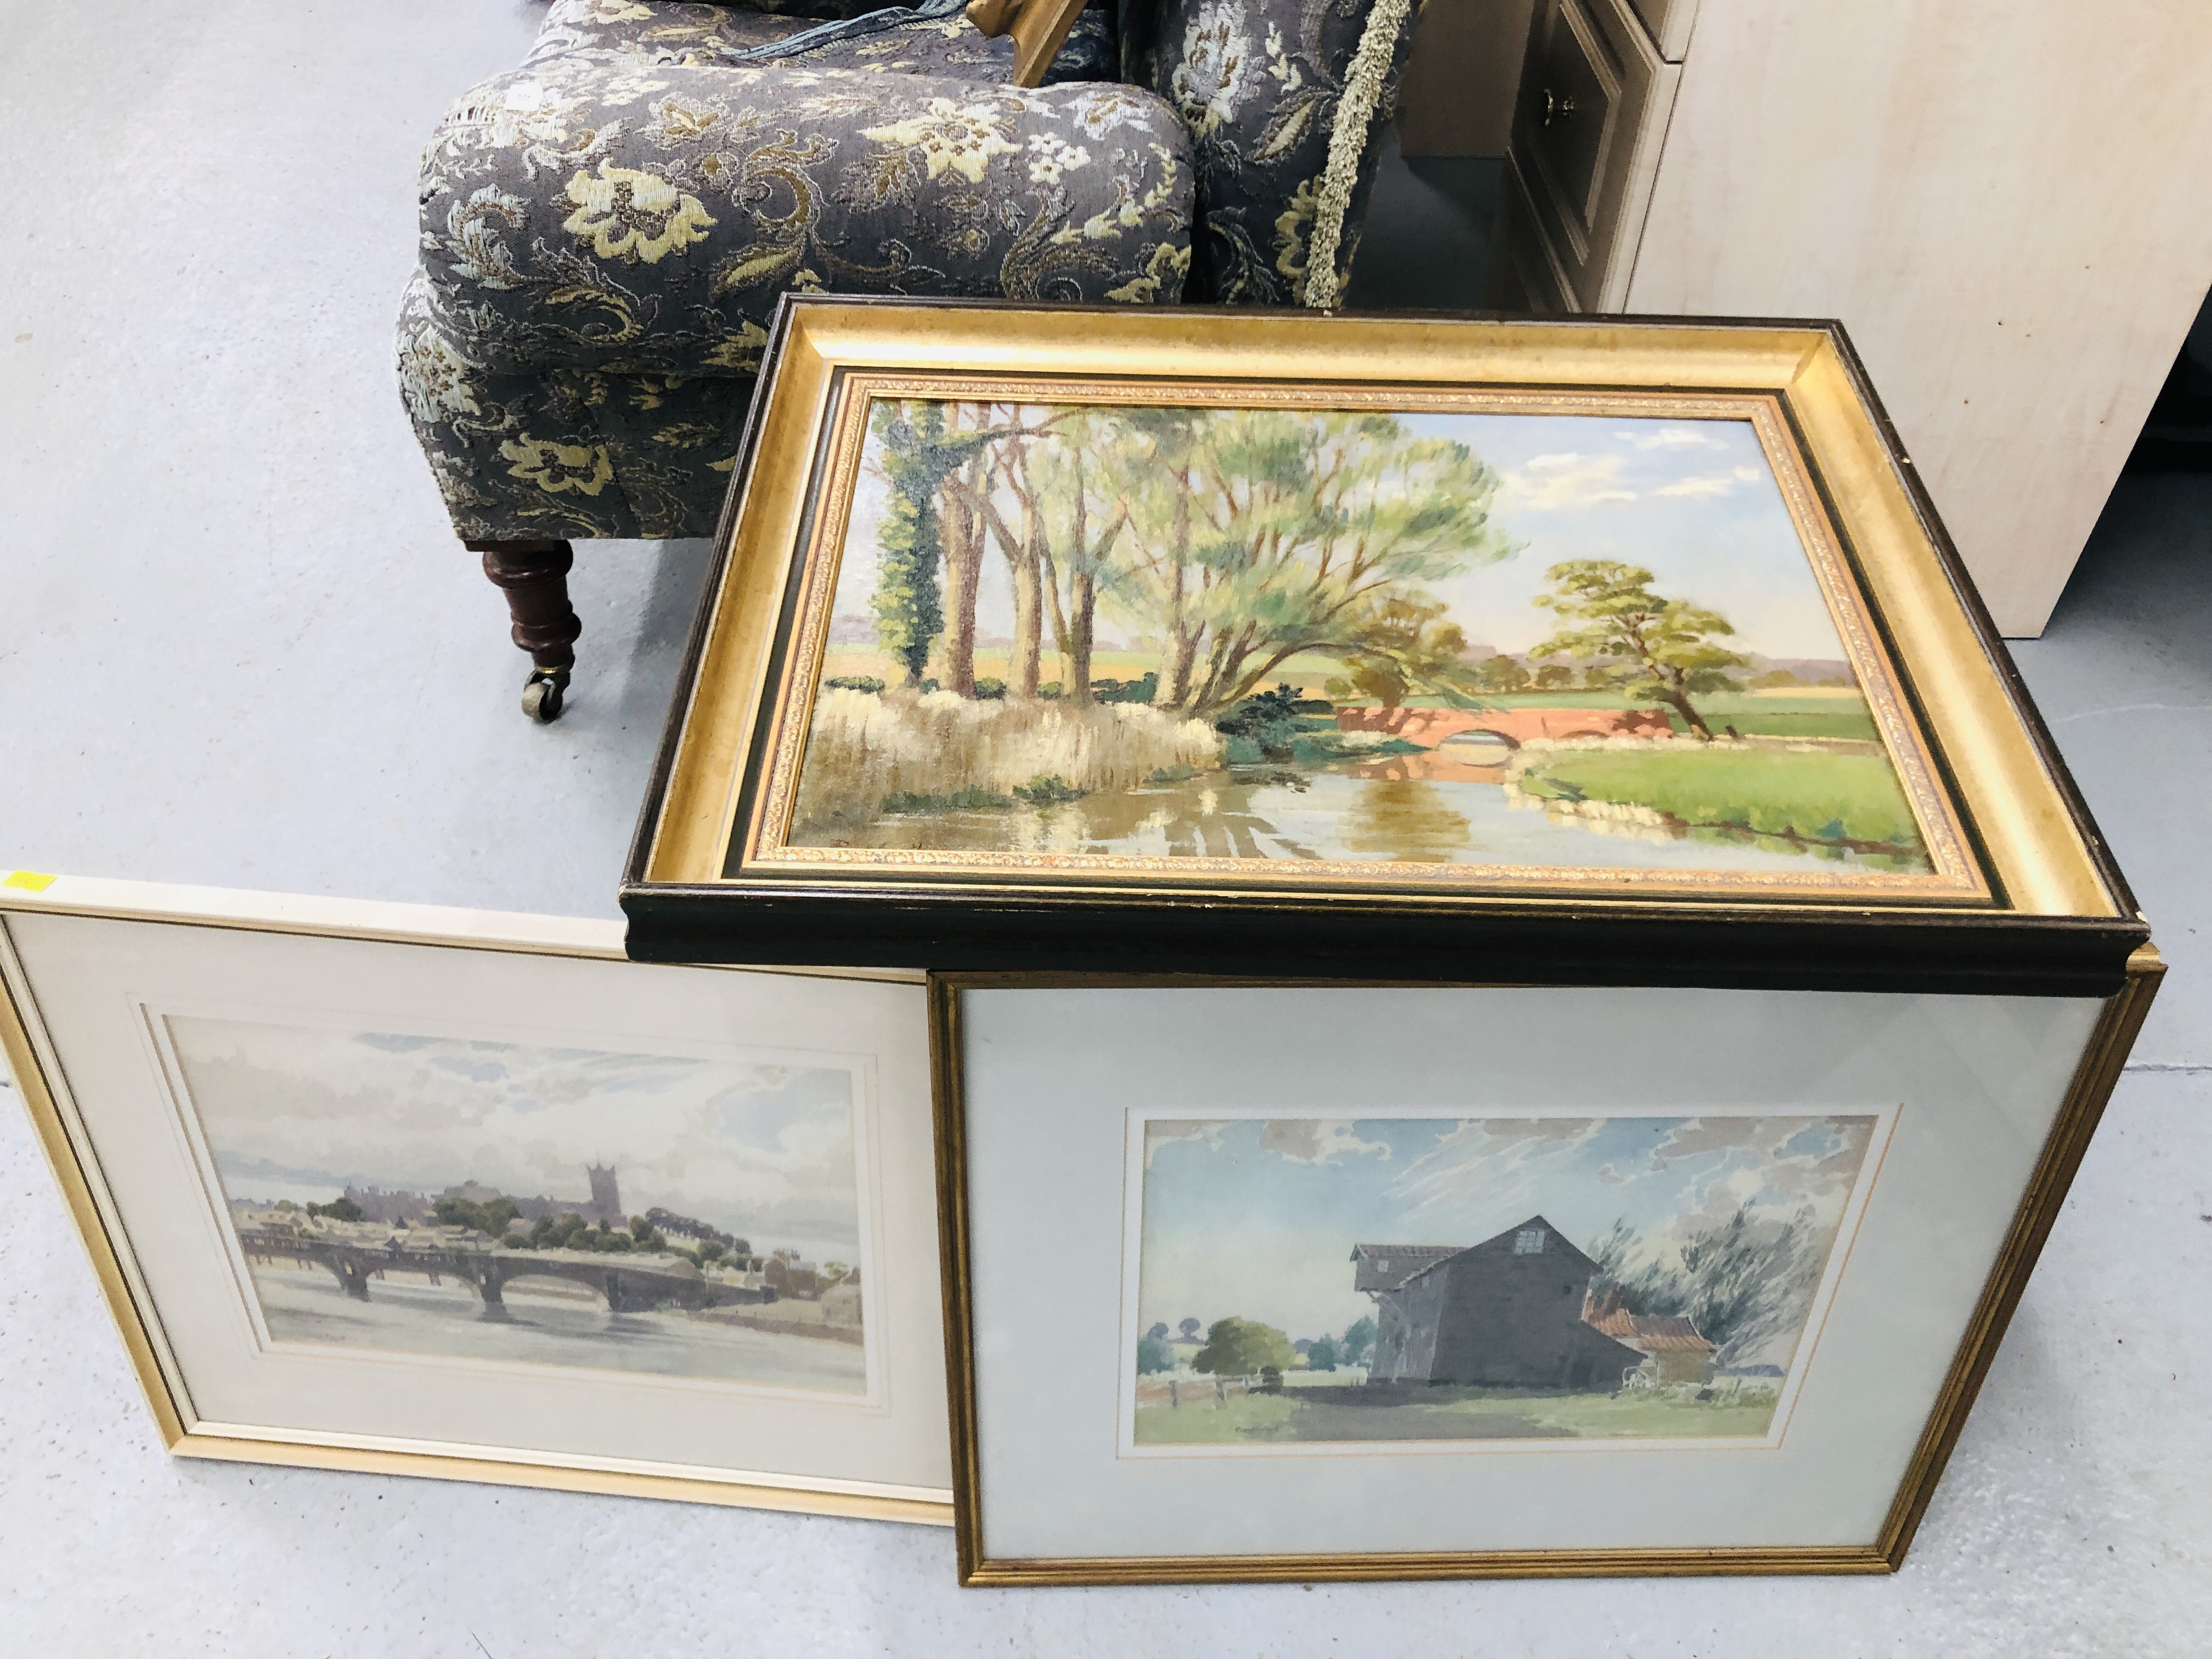 A FRAMED OIL ON CANVAS OF RIVER SCENE BEARING SIGNATURE PAUL SMYTH ALONG WITH TWO FURTHER